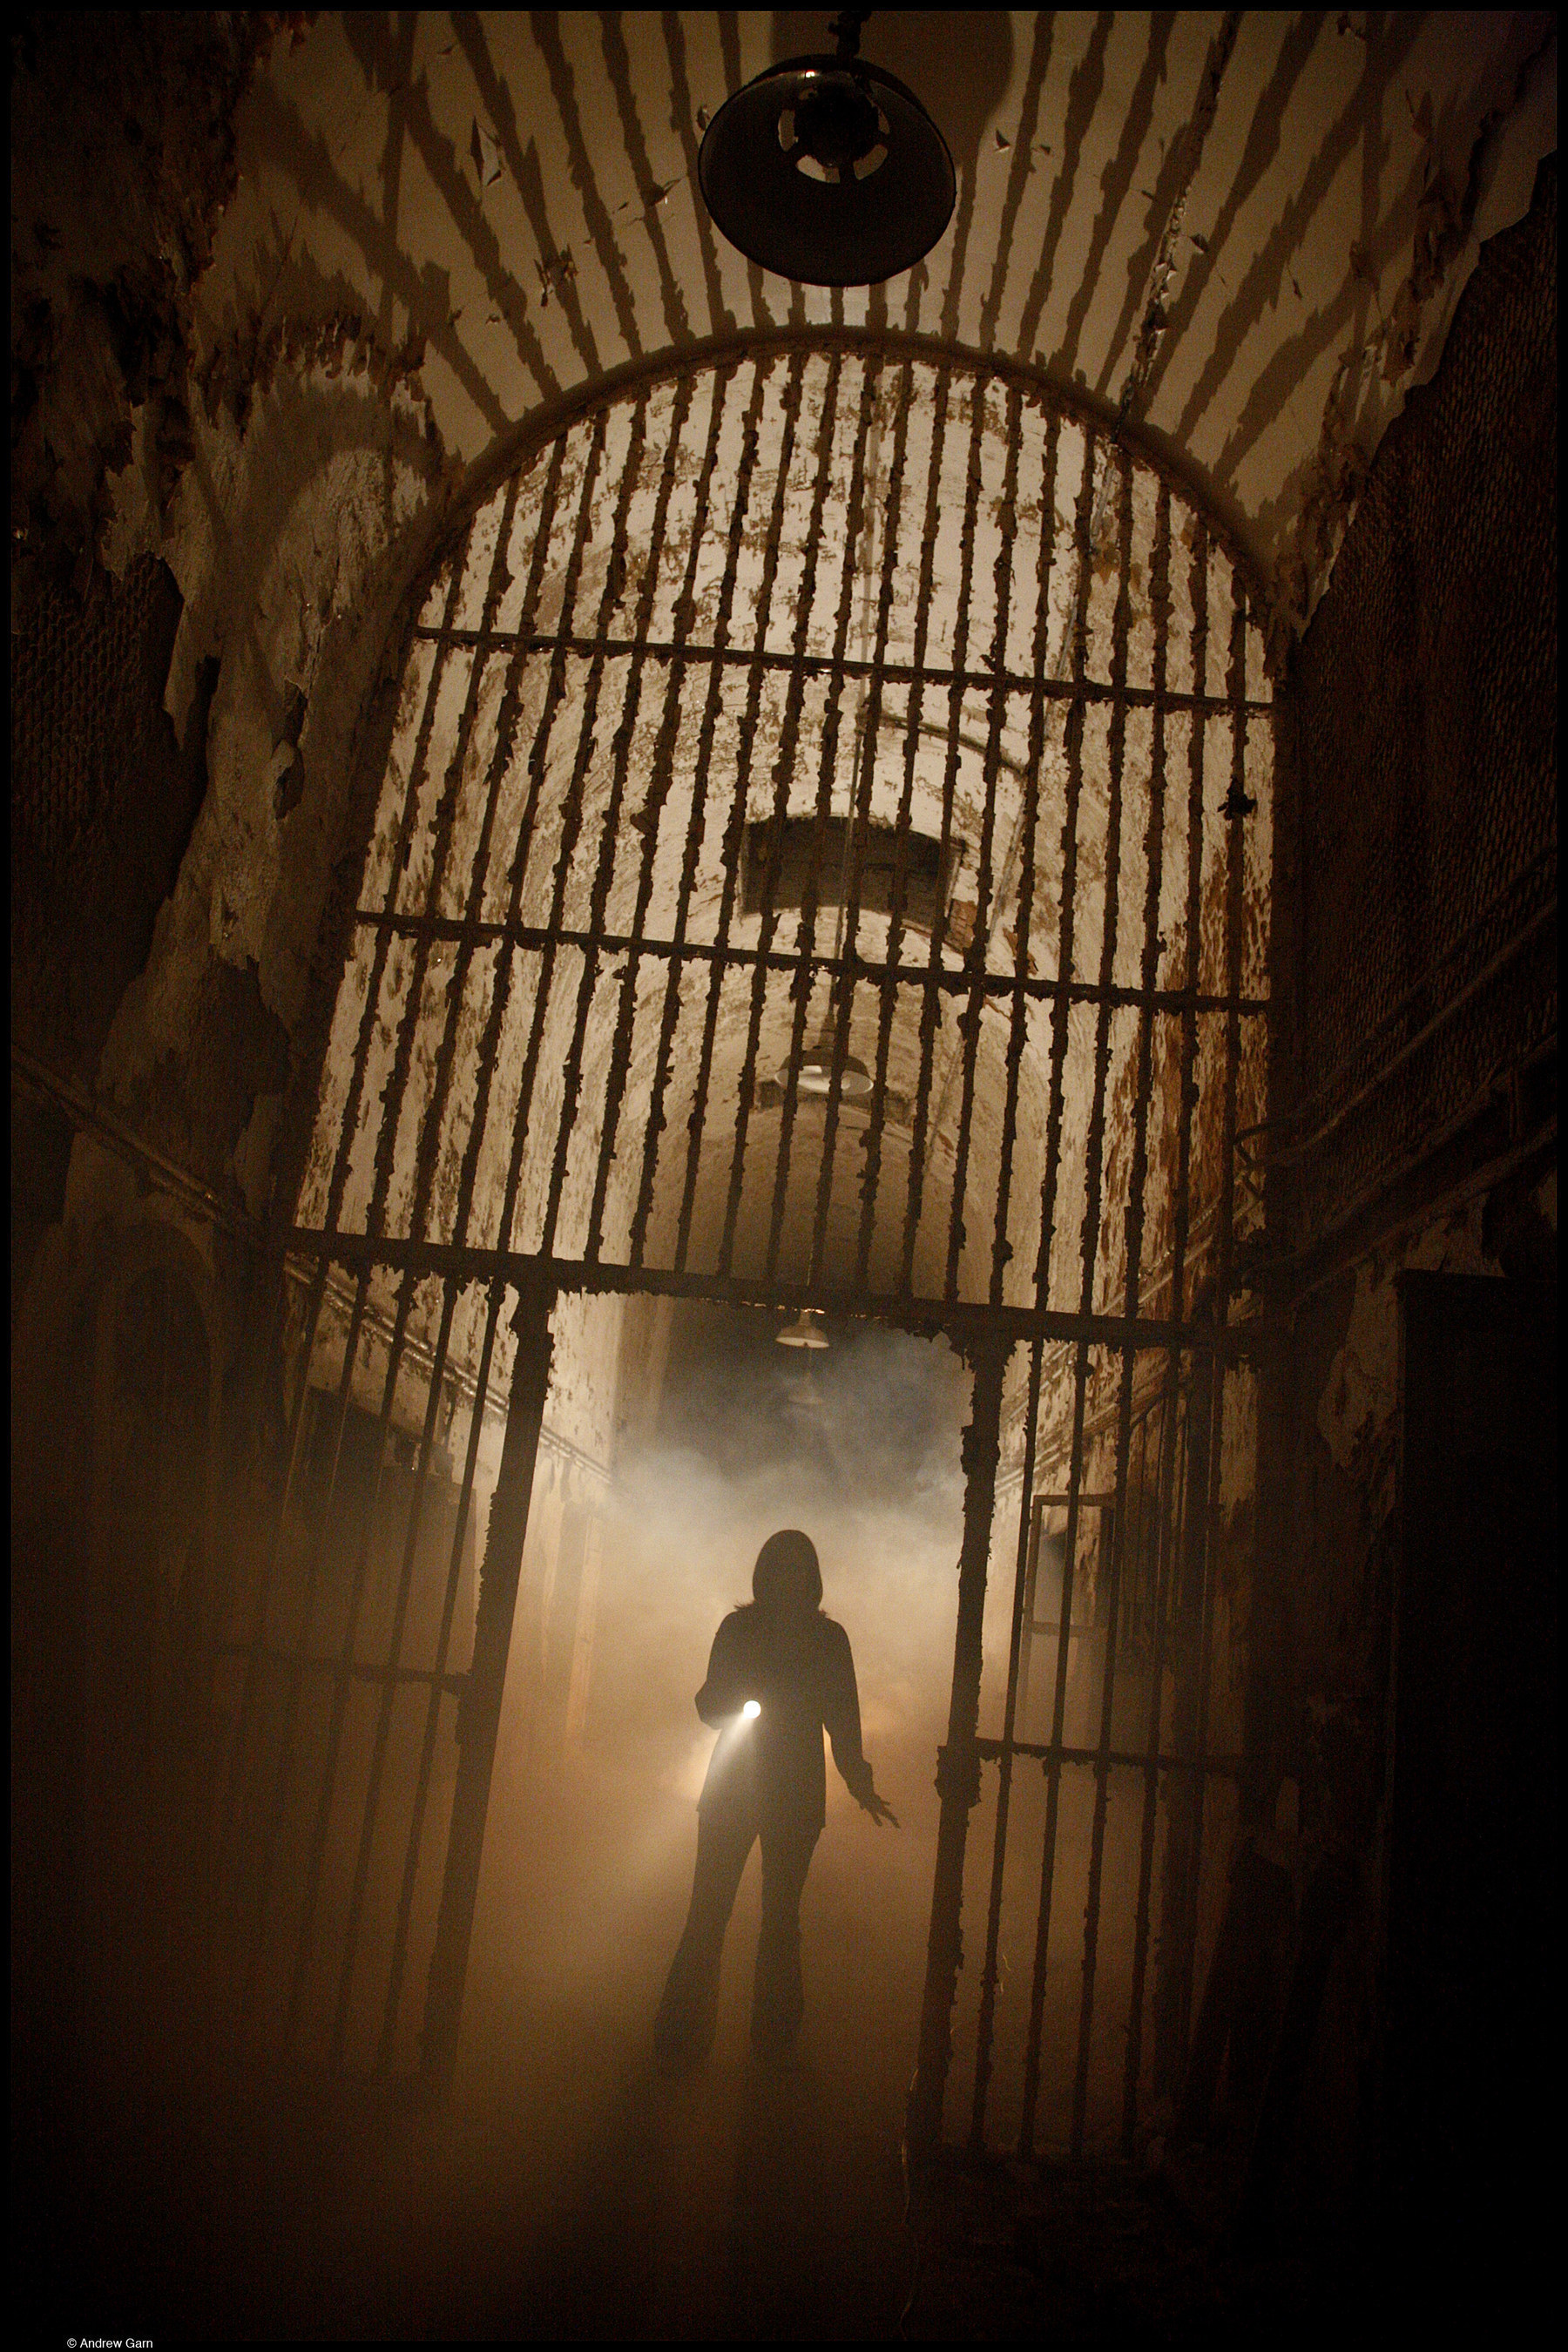 Terror Behind the Walls, America's largest haunted house, is located inside the massive castle-like walls of Eastern State Penitentiary in Philadelphia. Consistently ranked among the top haunted attractions in America, Terror Behind the Walls celebrates its 25th season of scares with two groundbreaking new attractions.